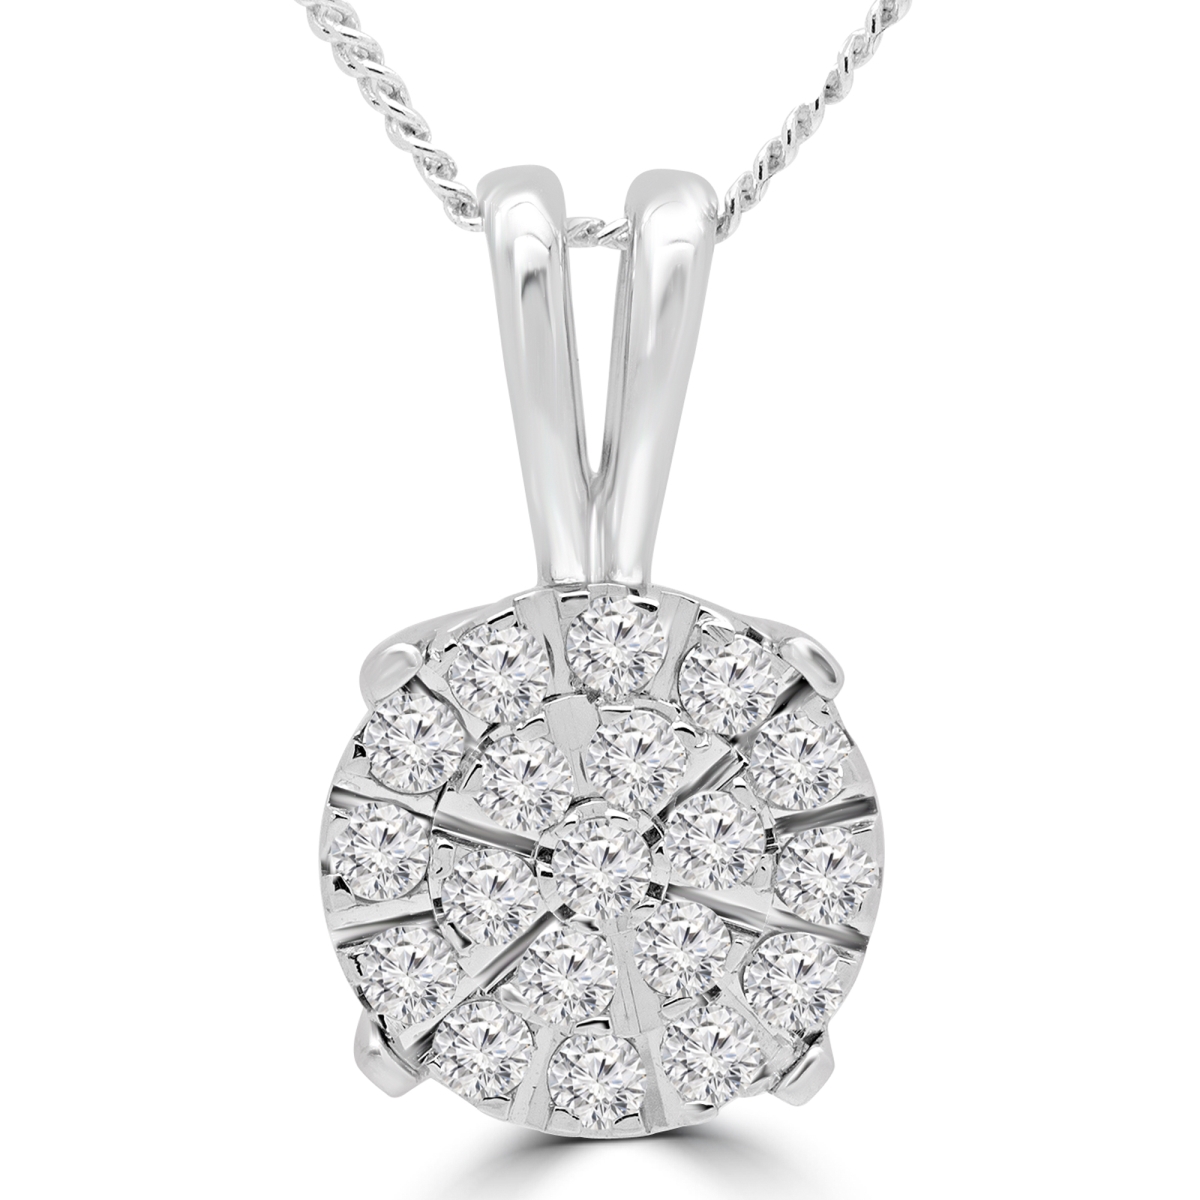 Mdr180021 0.5 Ctw Round Diamond Cluster Pendant Necklace In 14k White Gold With Chain